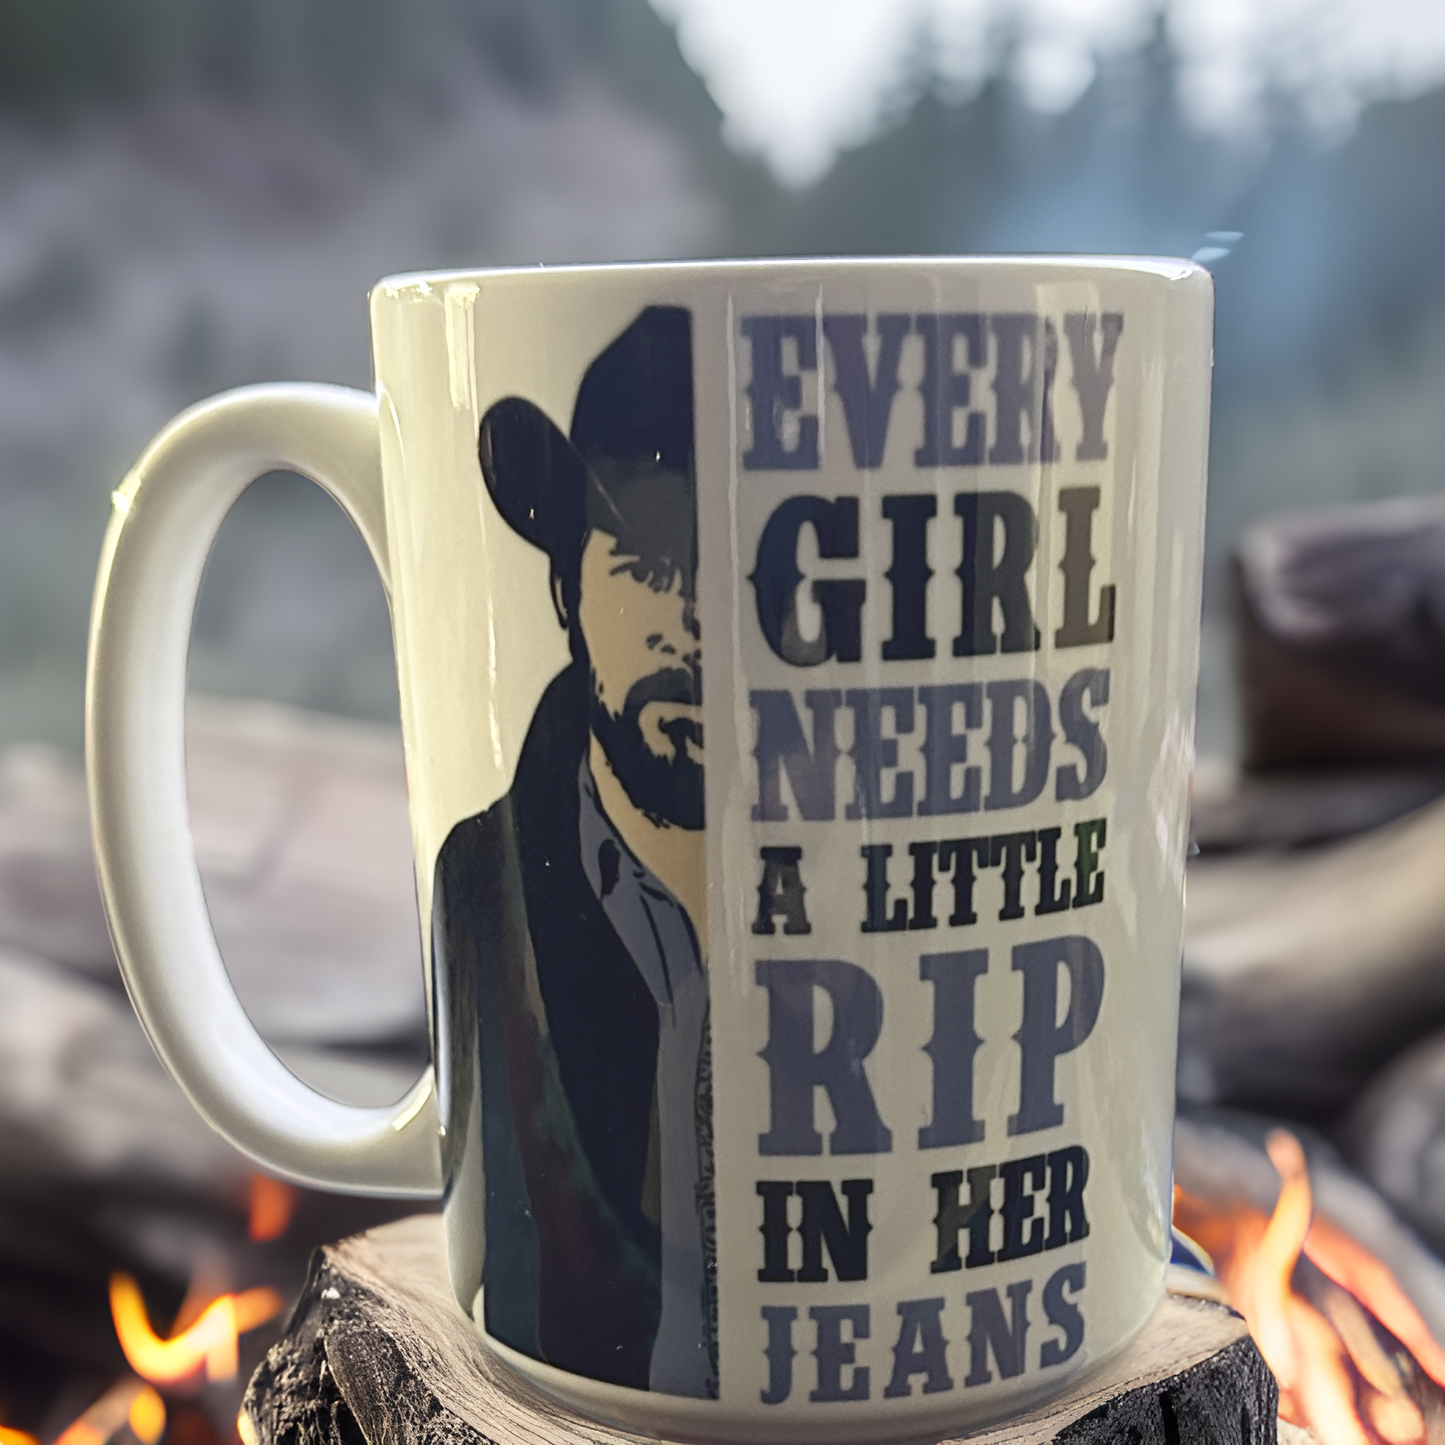 Every Girl Needs a RIP in her Jeans Coffee Mug